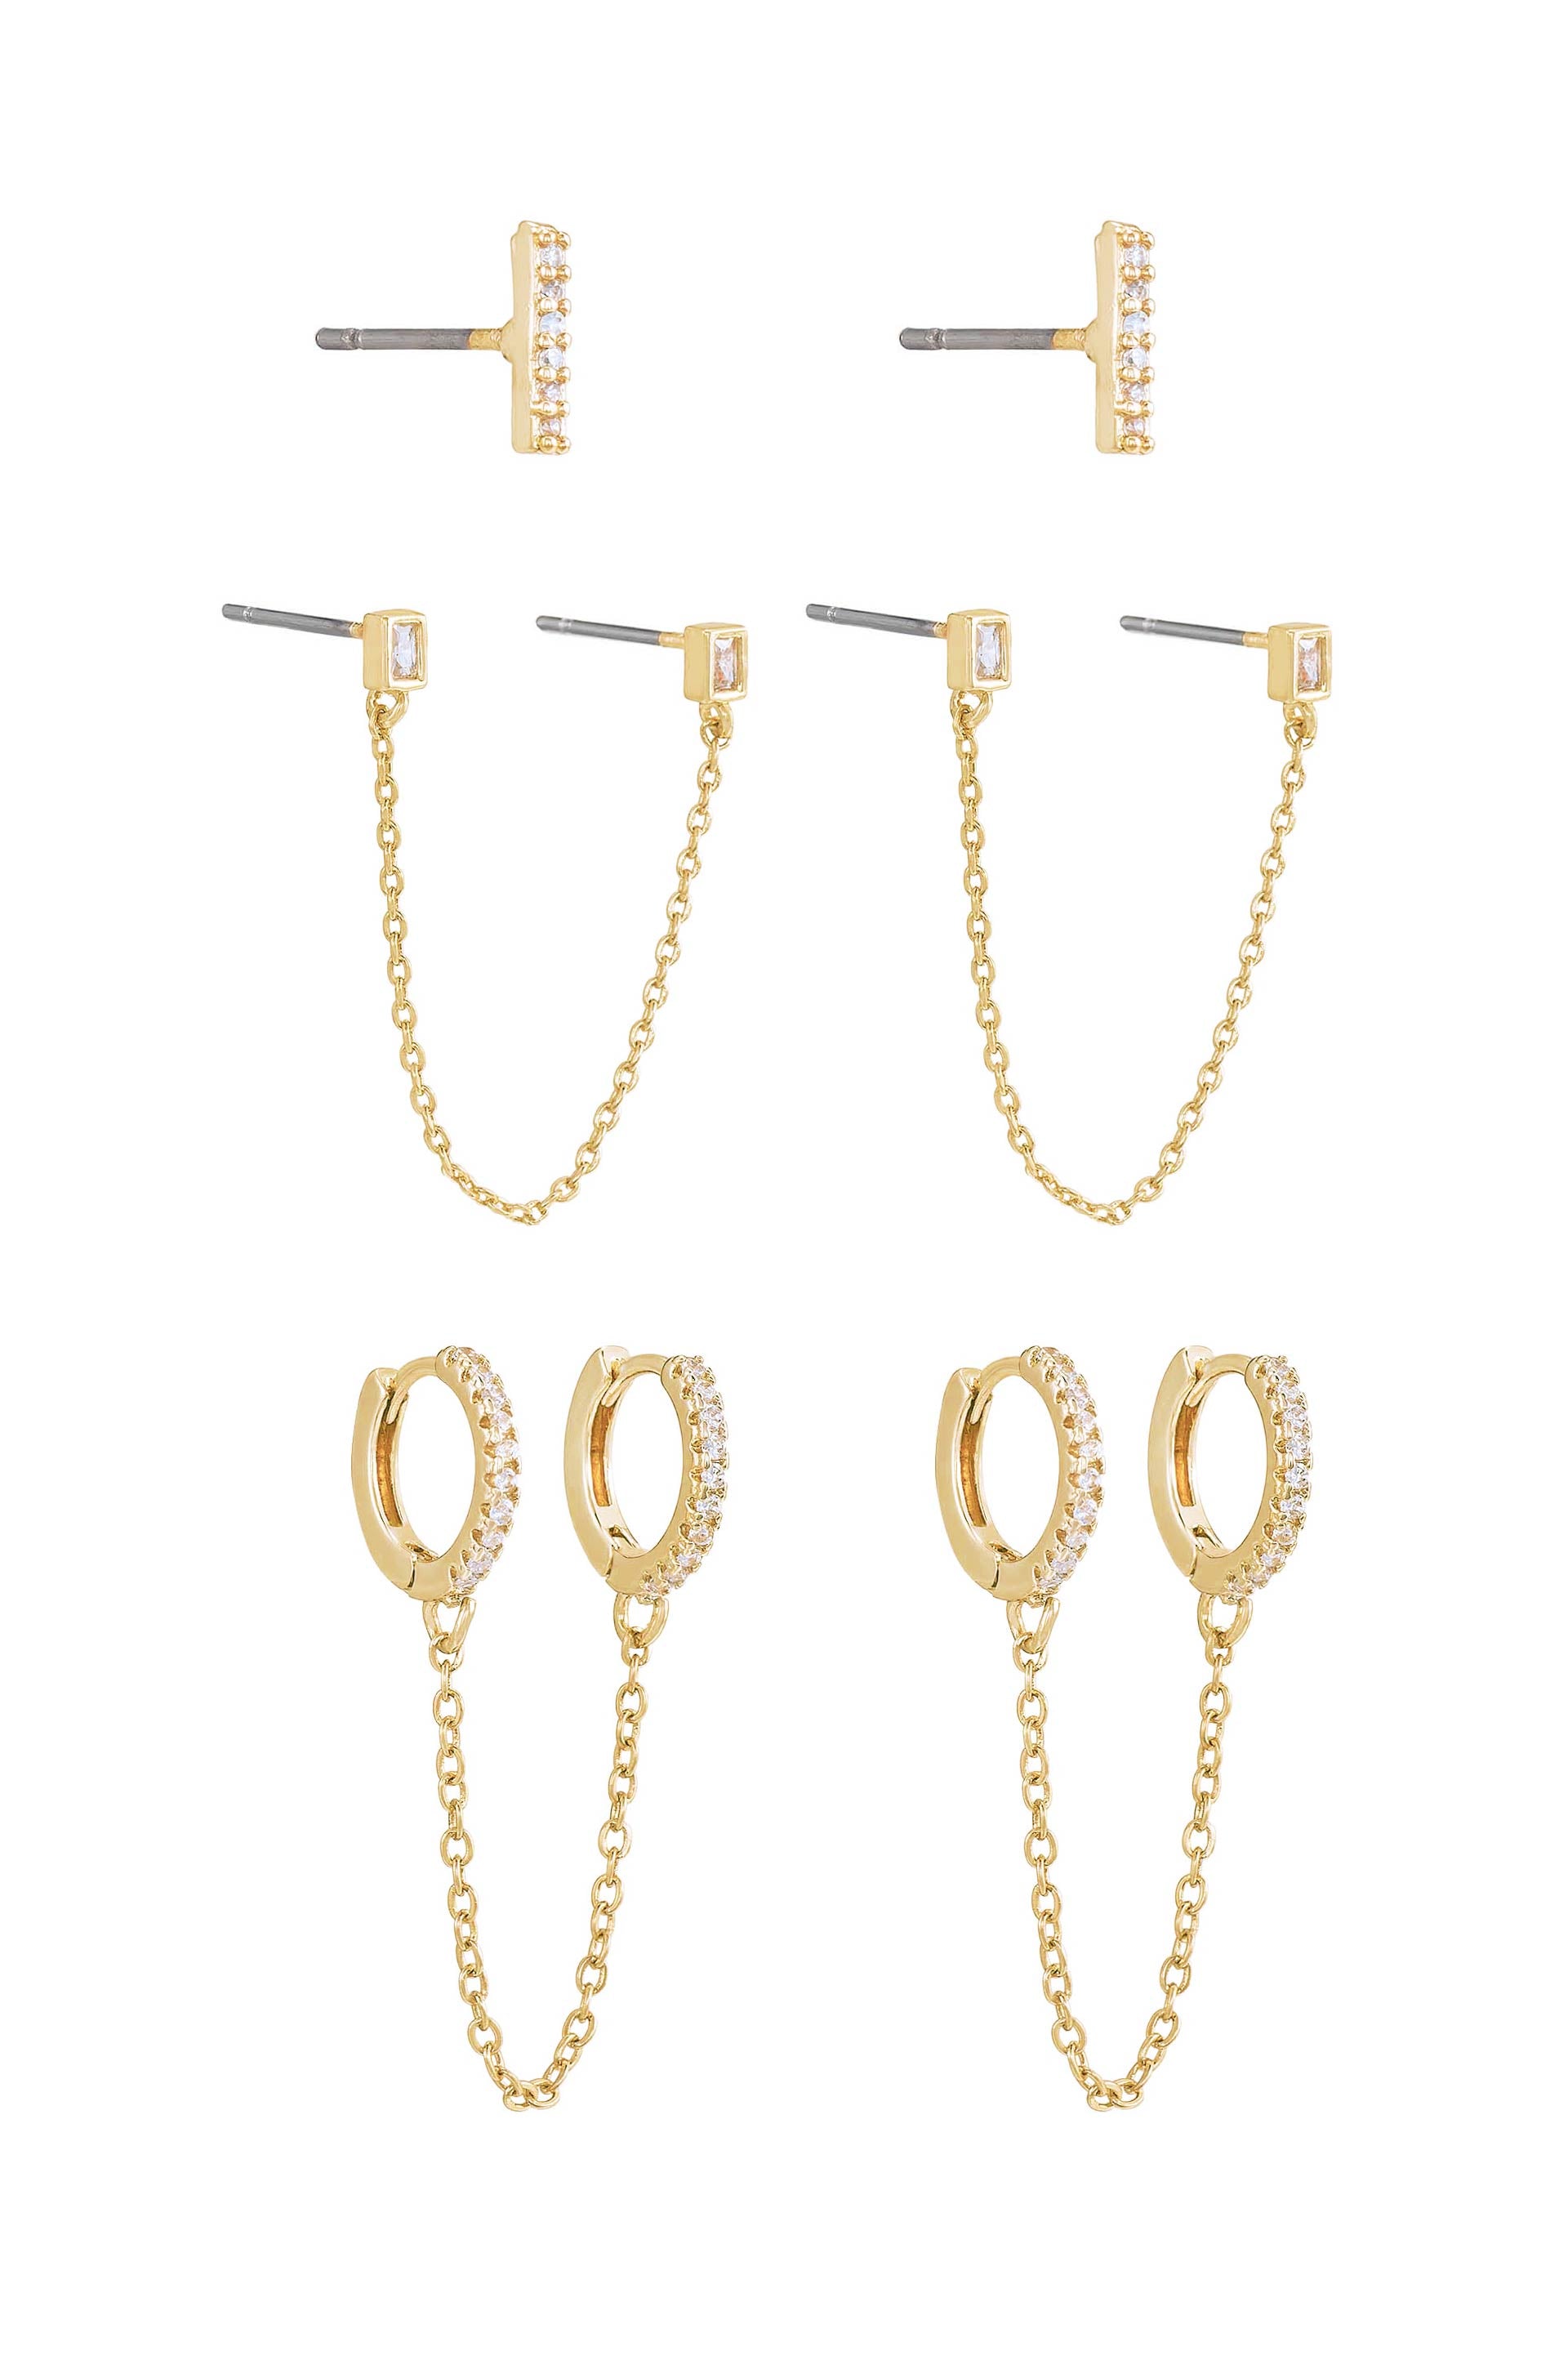 Vintage Faux Pearls and Gold Lariat Necklace and Earring Set → Hotbox  Vintage